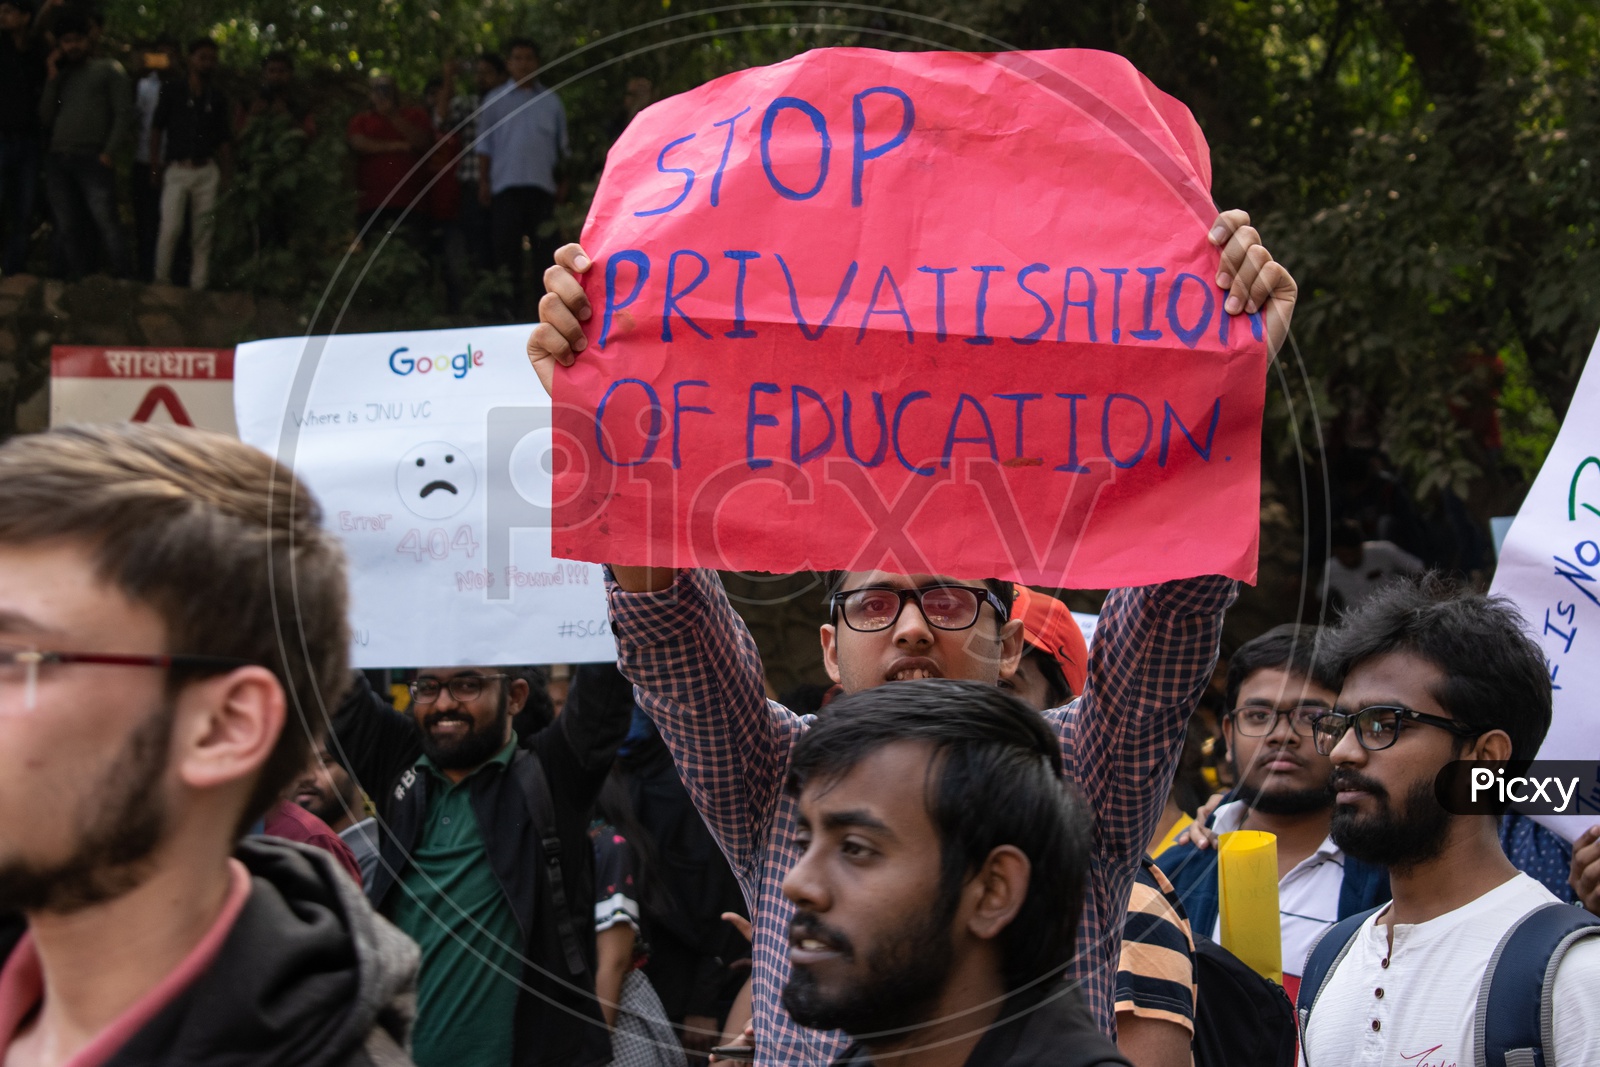 JNU(Jawaharlal Nehru University) students with slogans, demanding withdrawal of 'National Education Policy 2019' and protesting against fee hike and other issues related to Education